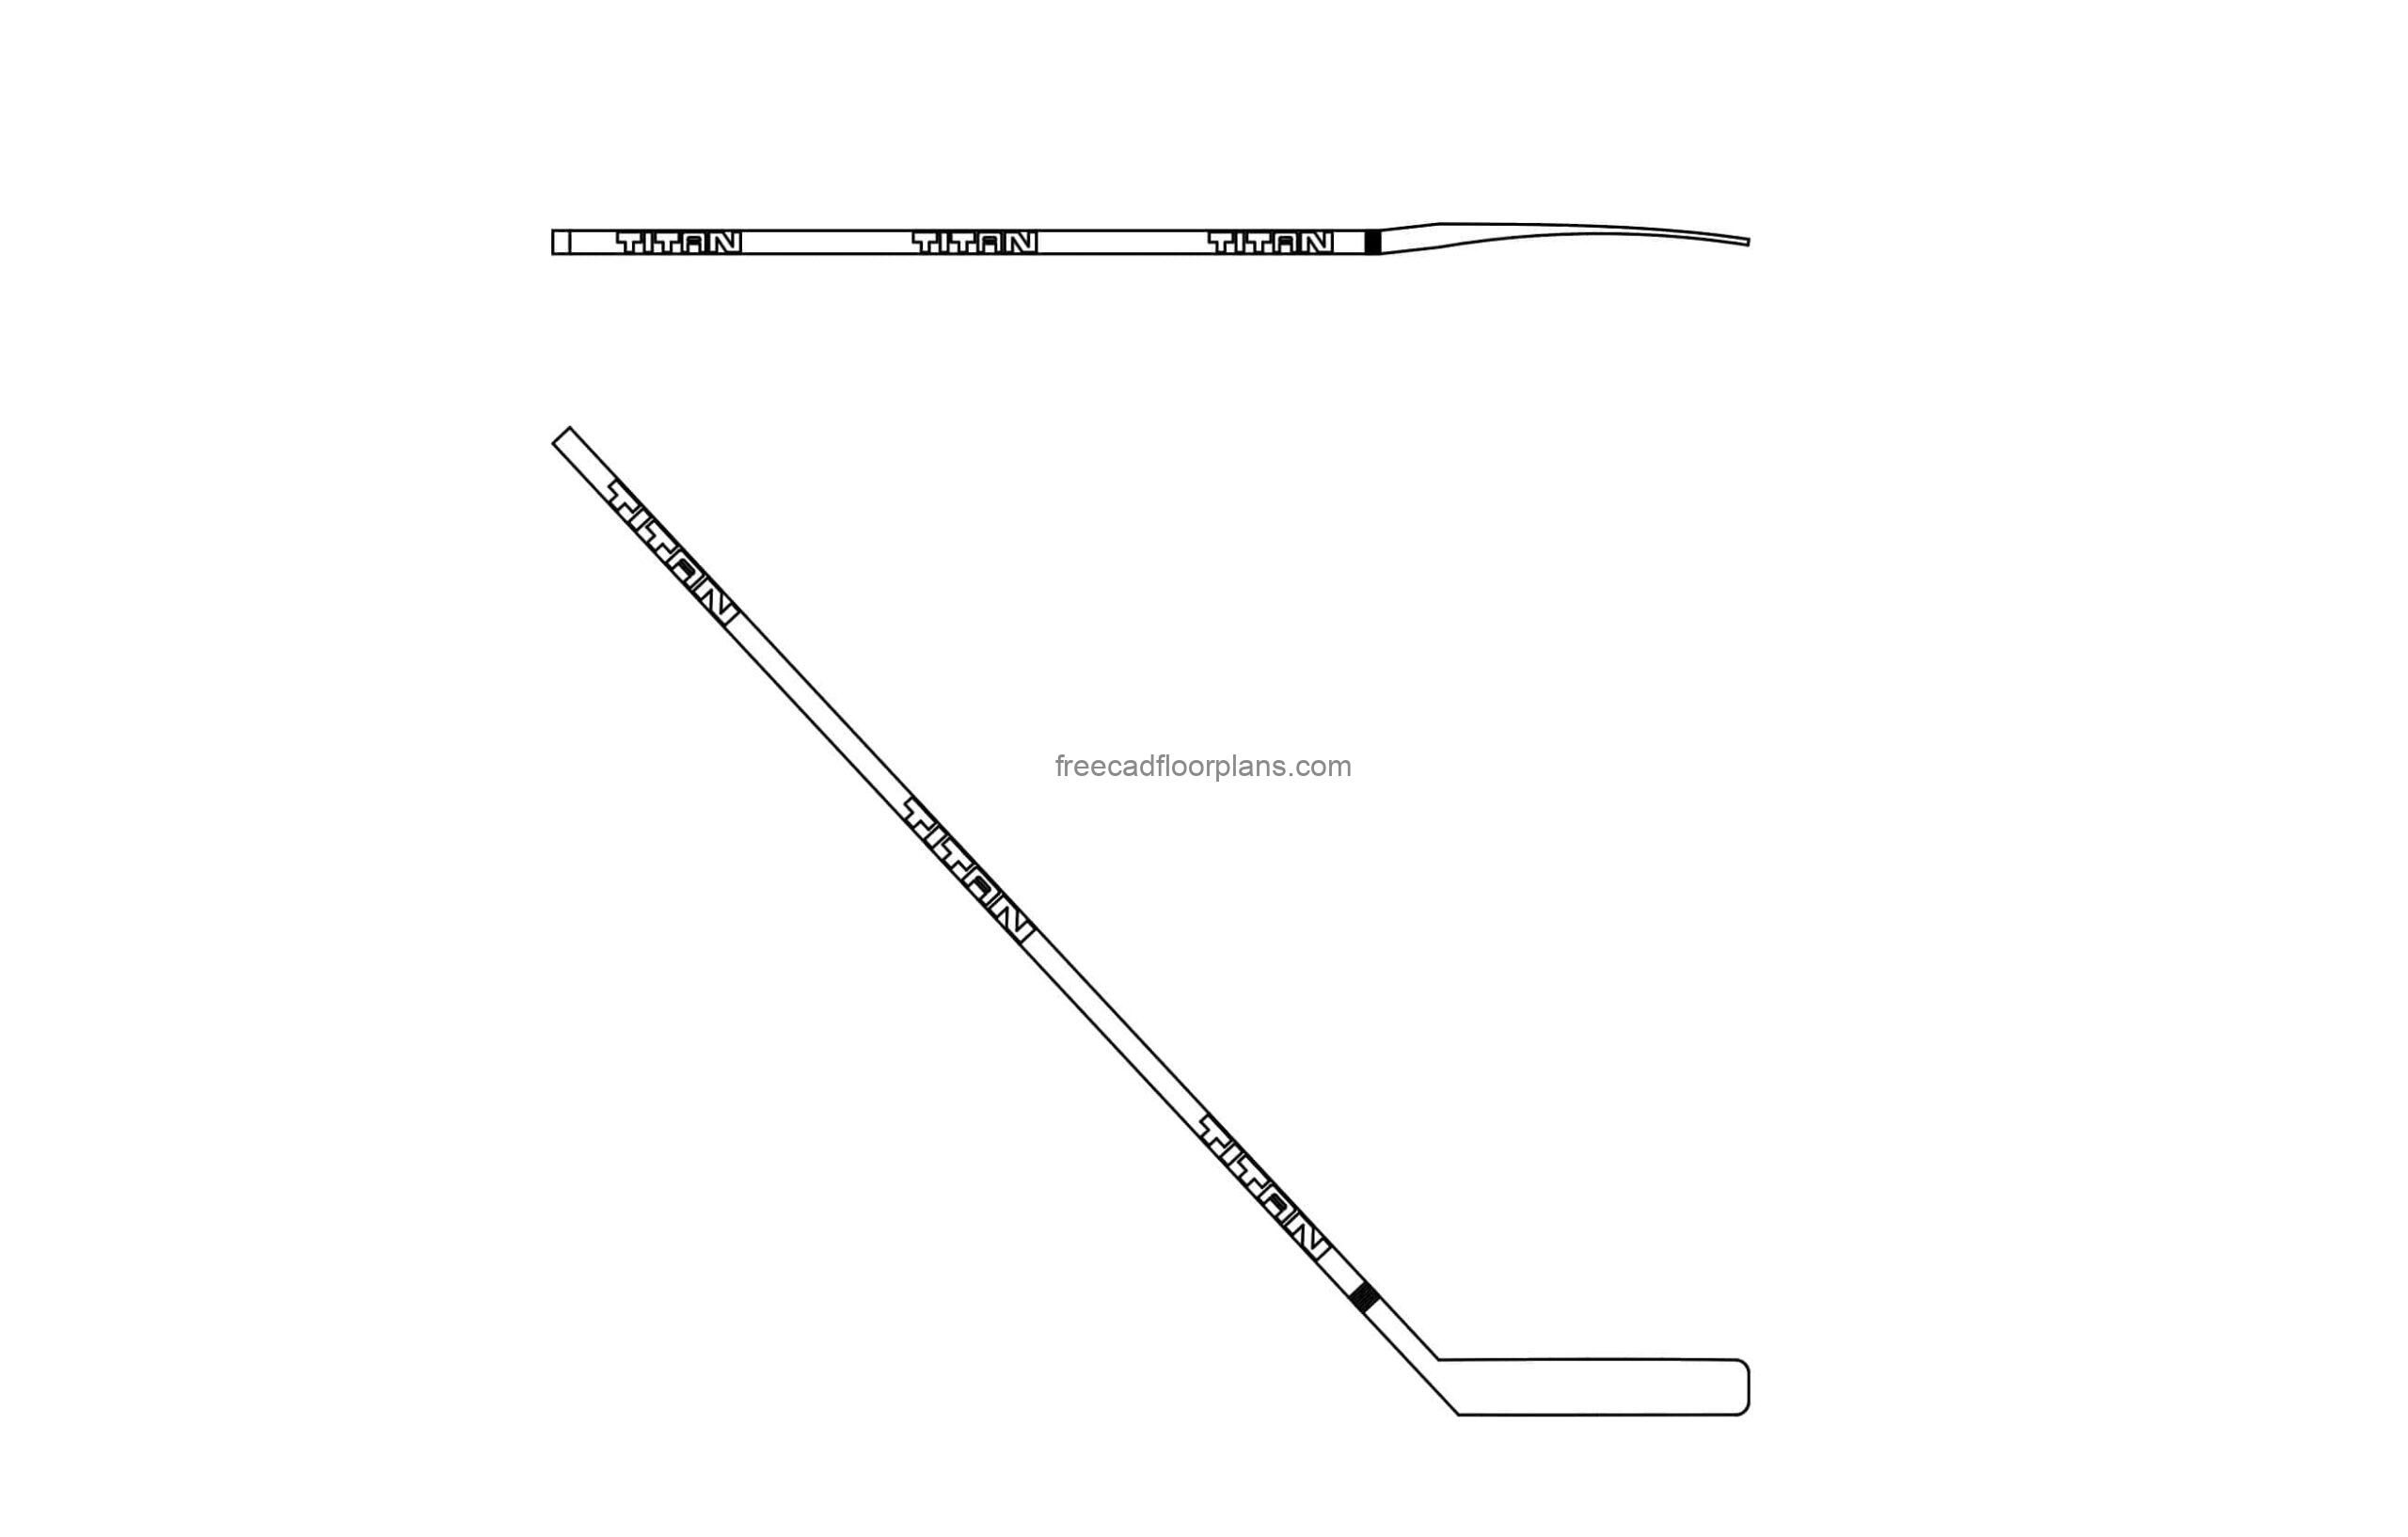 hockey stick cad block drawing 2d elevation and plan views dwg draw model for free download